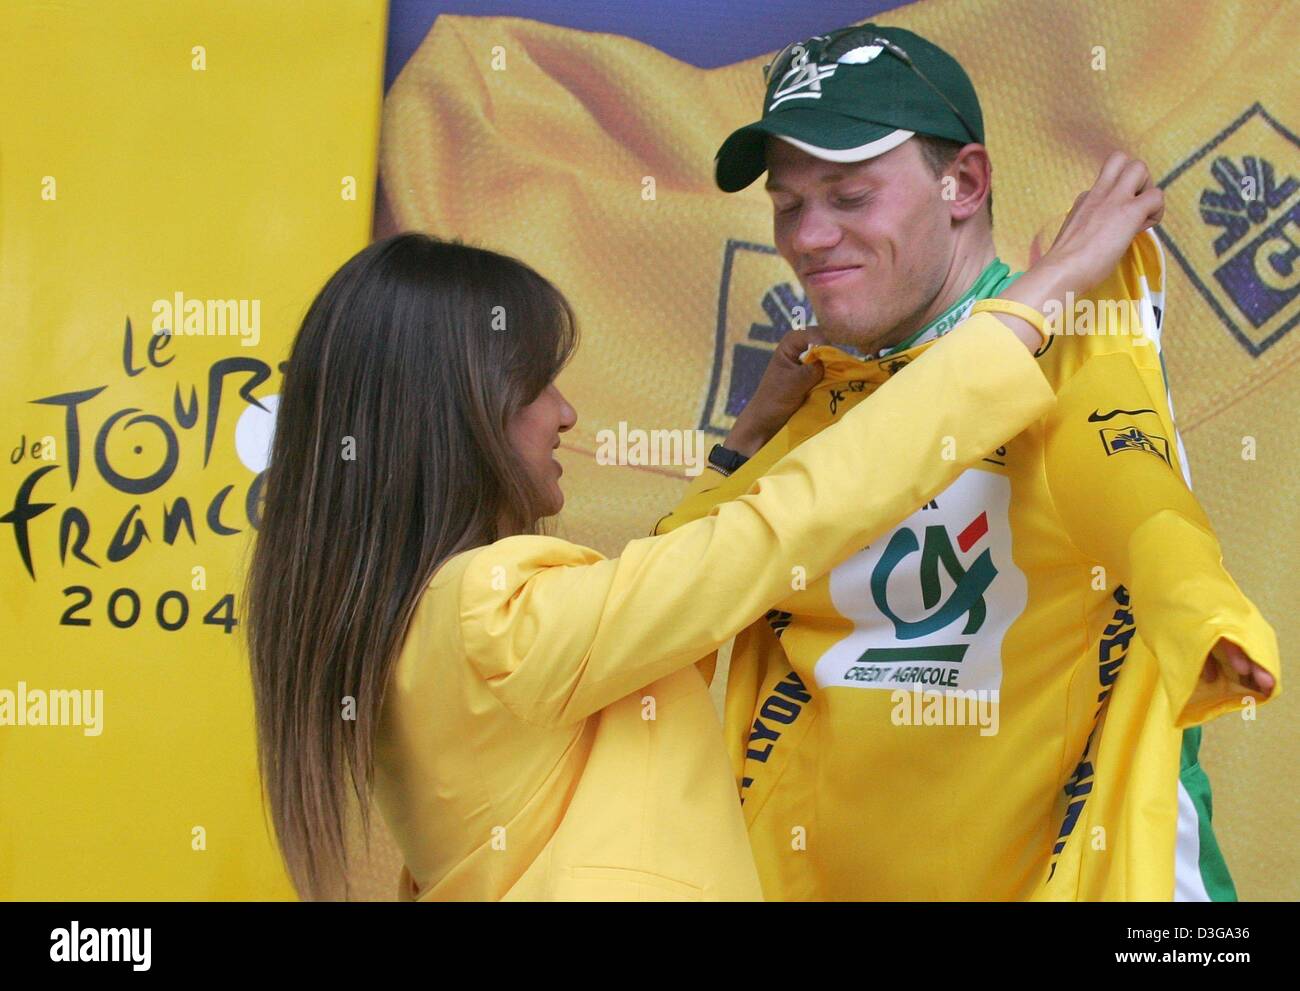 (dpa) - Norwegian cyclist Thor Hushovd of team Credit Agricole receives the yellow jersey of the overall leader after the second stage of the Tour de France in Namur, Belgium, 5 July 2004. The second and 197km long stage of the 91st Tour de France cycling race took the cyclists from Charleroi to Namur. A second place finish in the stage was enough for Hushovd to take over the yello Stock Photo